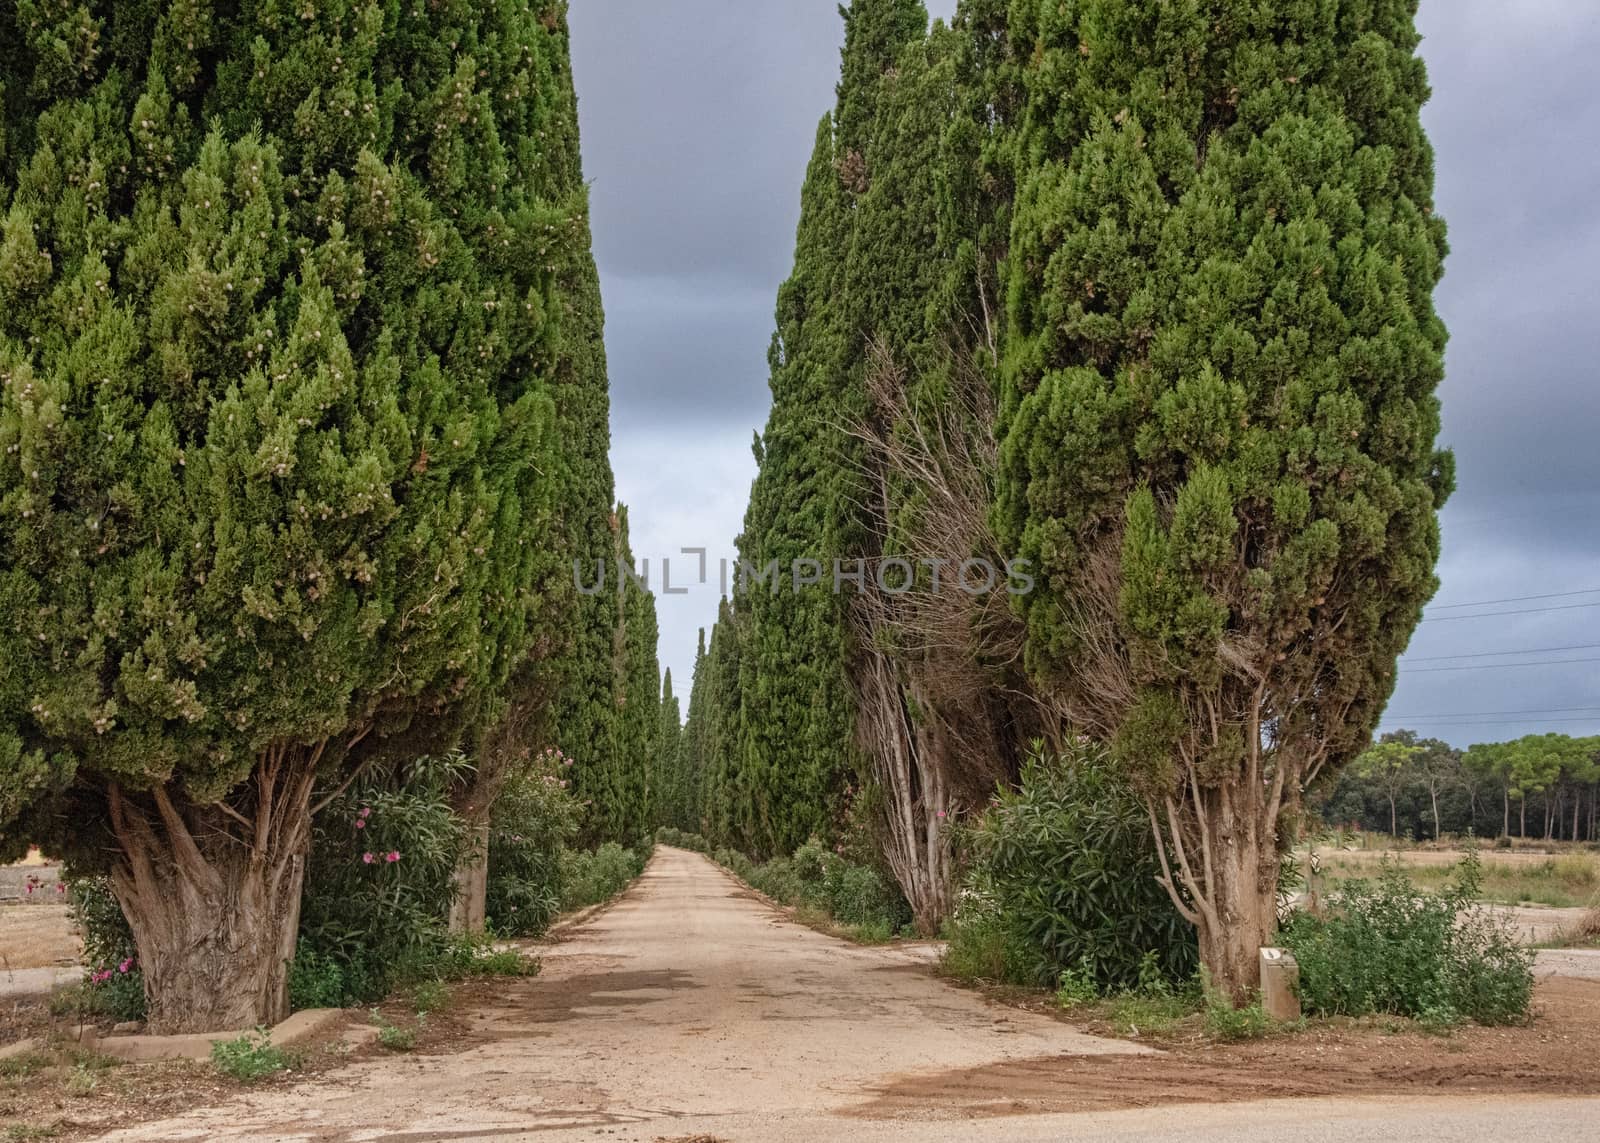 Spain, L'Amettlia Des Valles - Sept 18: Road into the distance between cypress trees